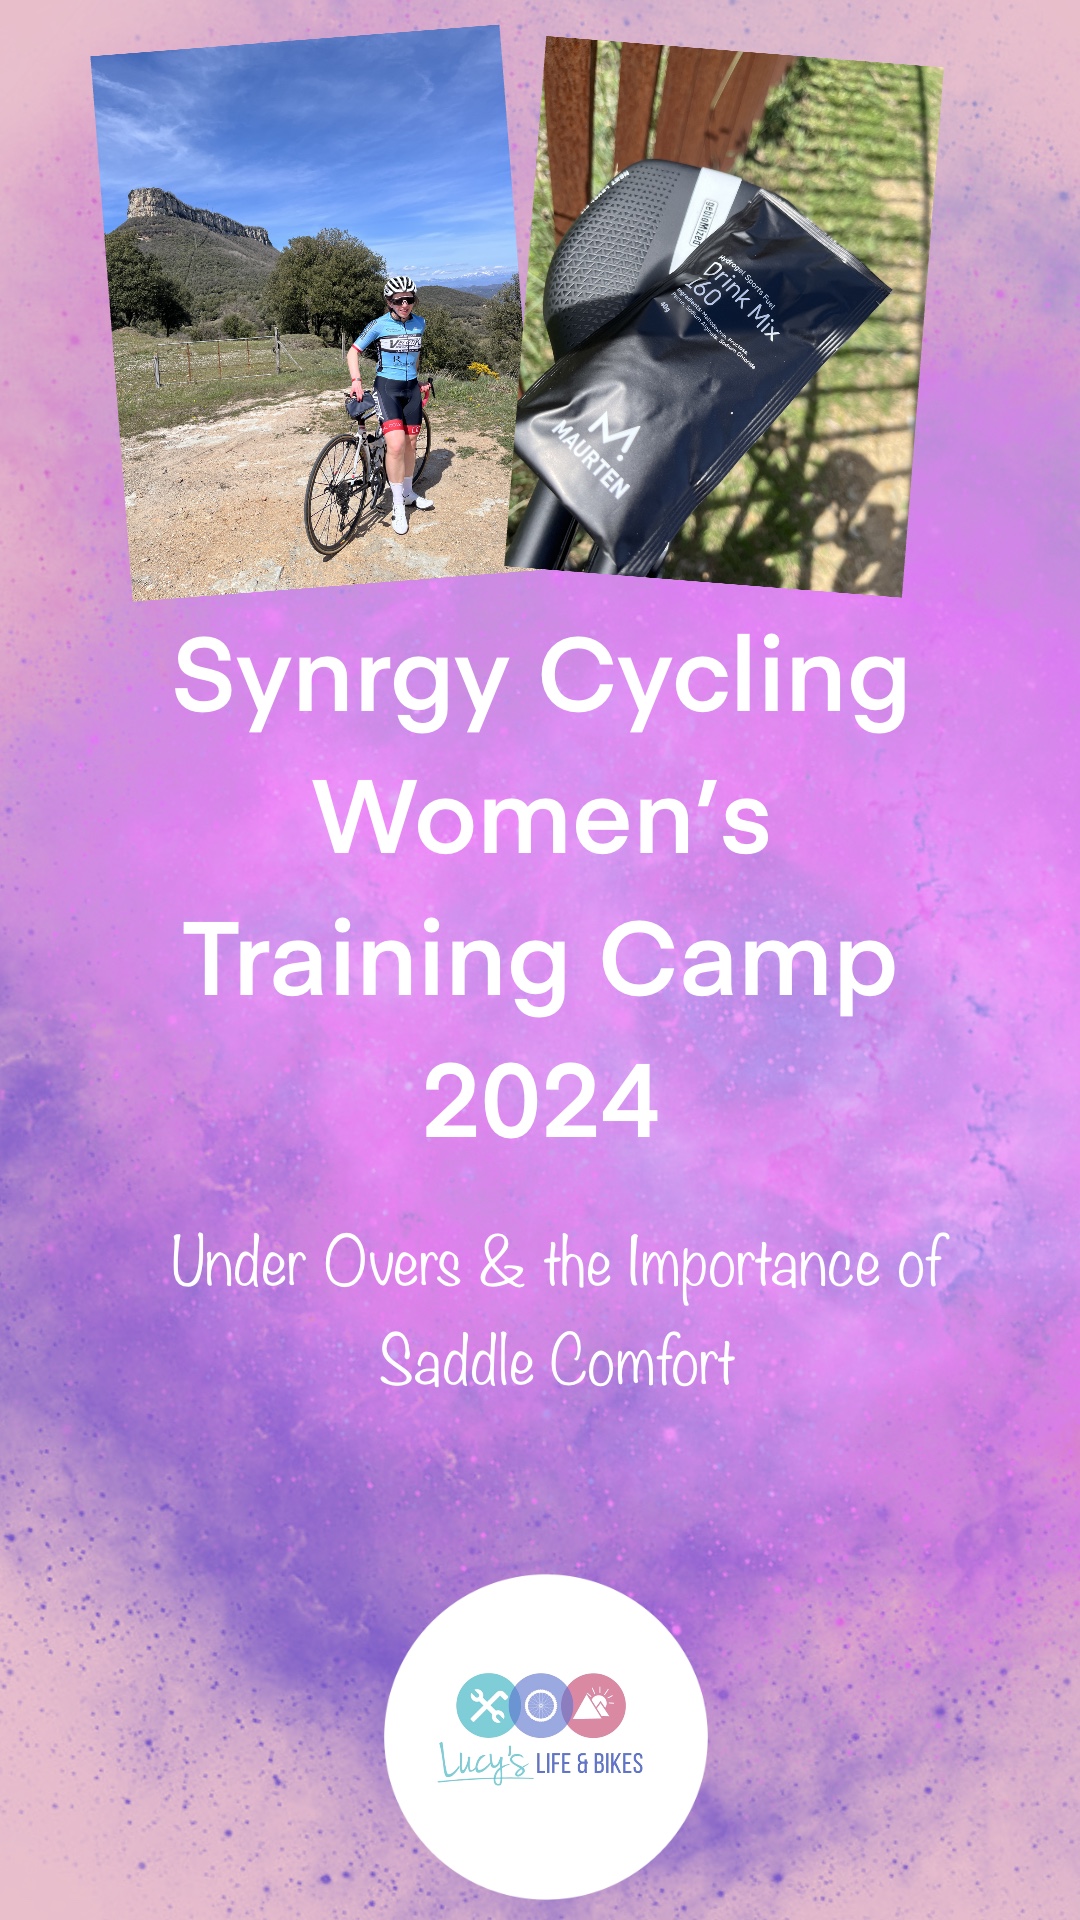 Title Image for Blog Post about Women's Cycling Training Camp in Girona